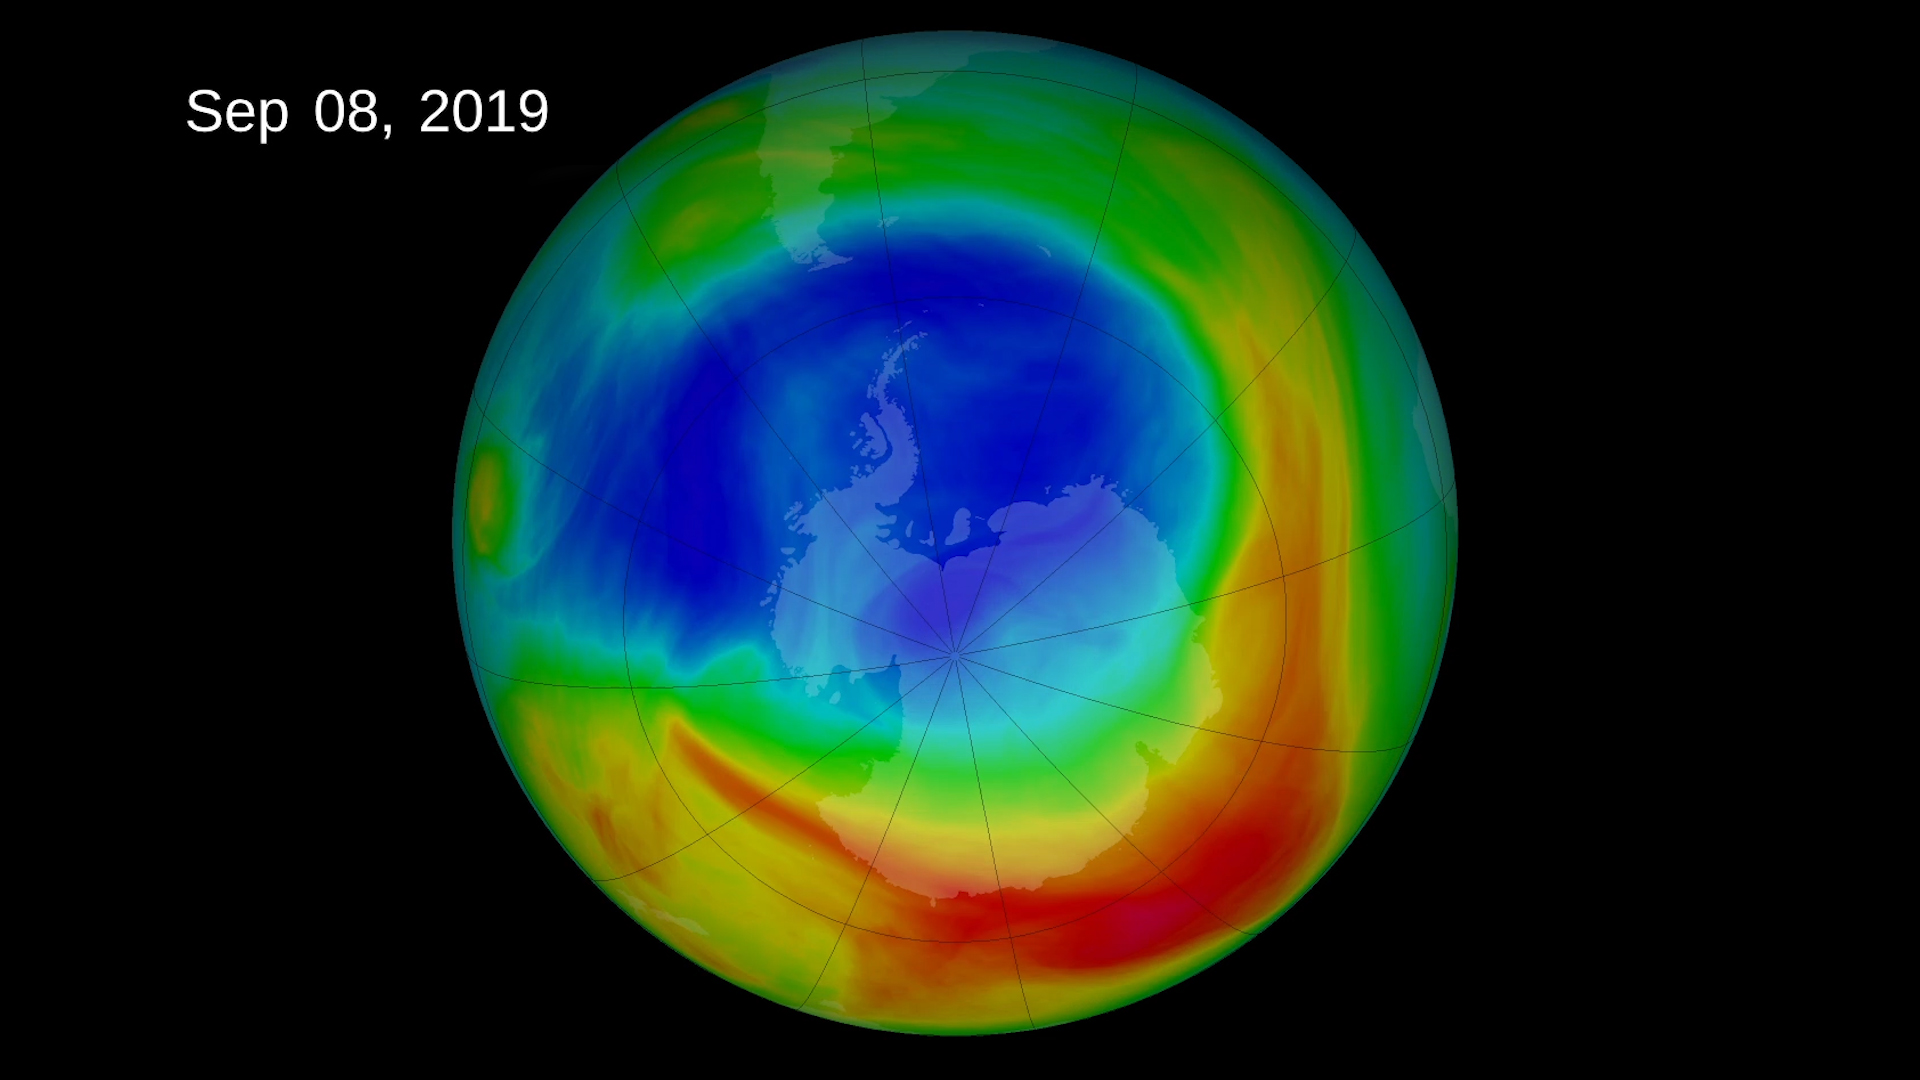 The hole in the ozone layer about Antarctica. https://commons.wikimedia.org/wiki/File:Ozoone_depletion.jpg